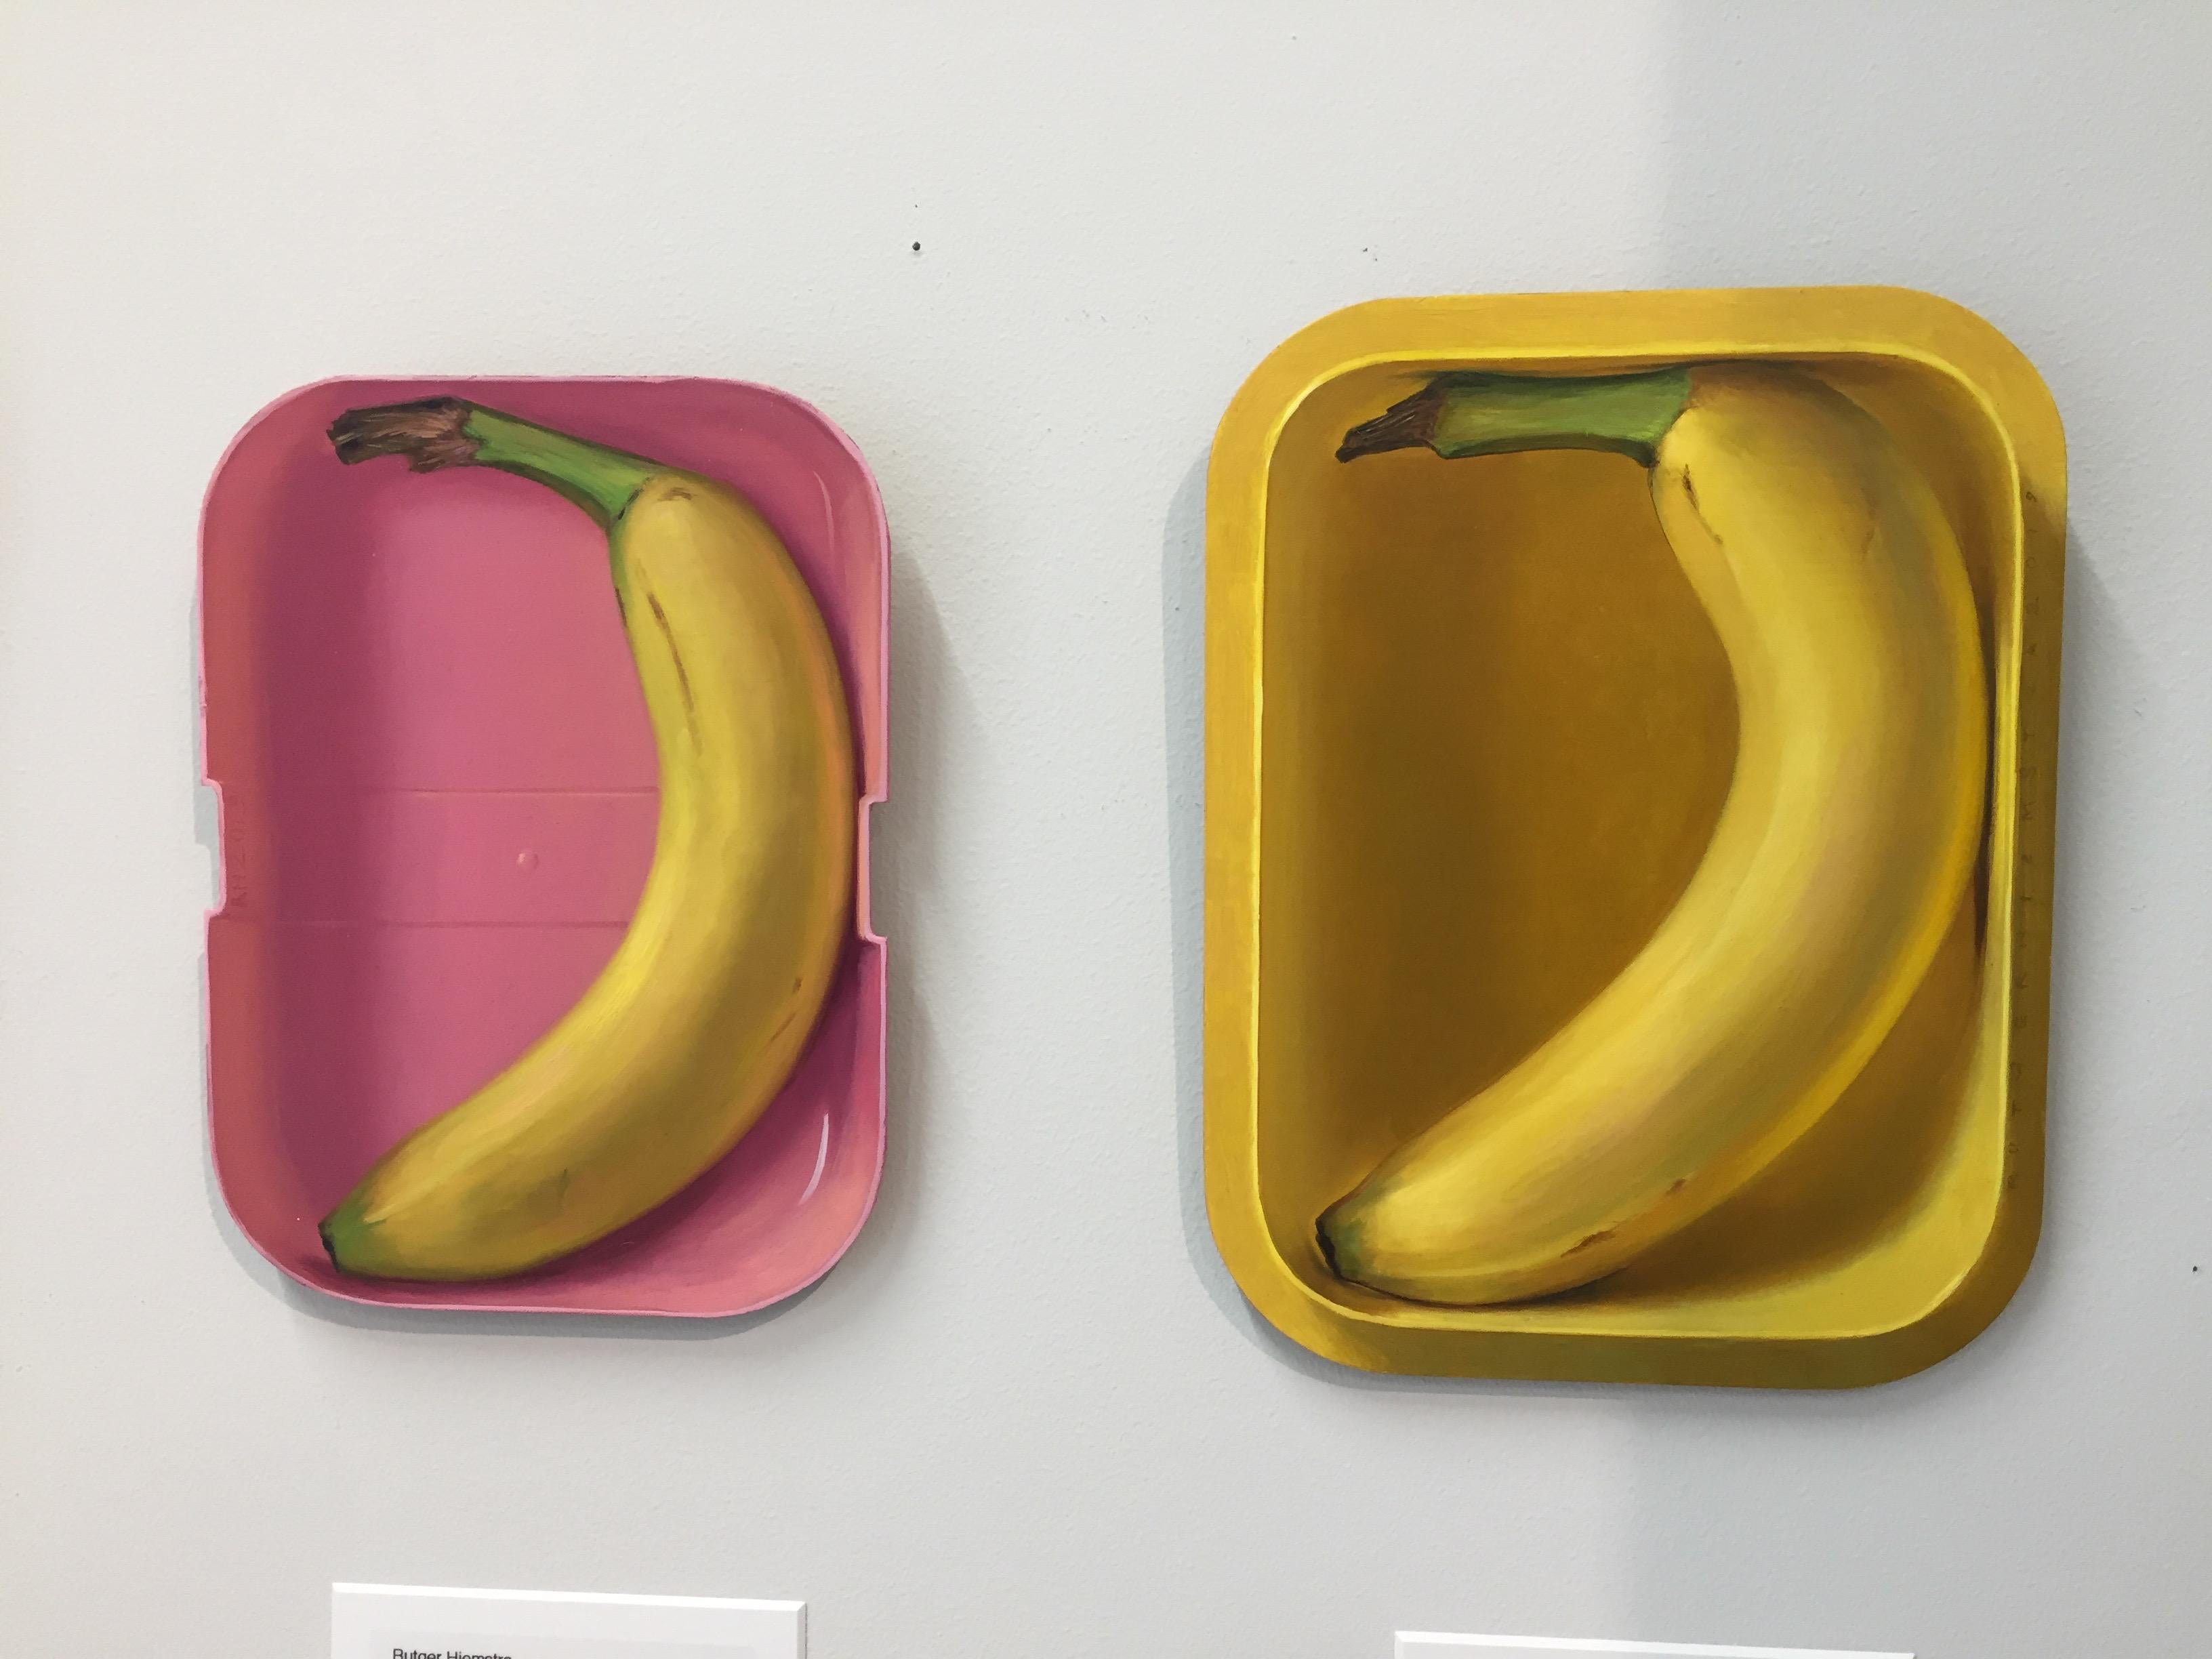 Rutger Hiemstra is a young Dutch artist who likes to paint objects out of his daily life. 
making the lunchbox ready for his kids he did a banana in a lunchbox, his first thought was: 'That would be a nice painting!'
Now he made a serie of it. The